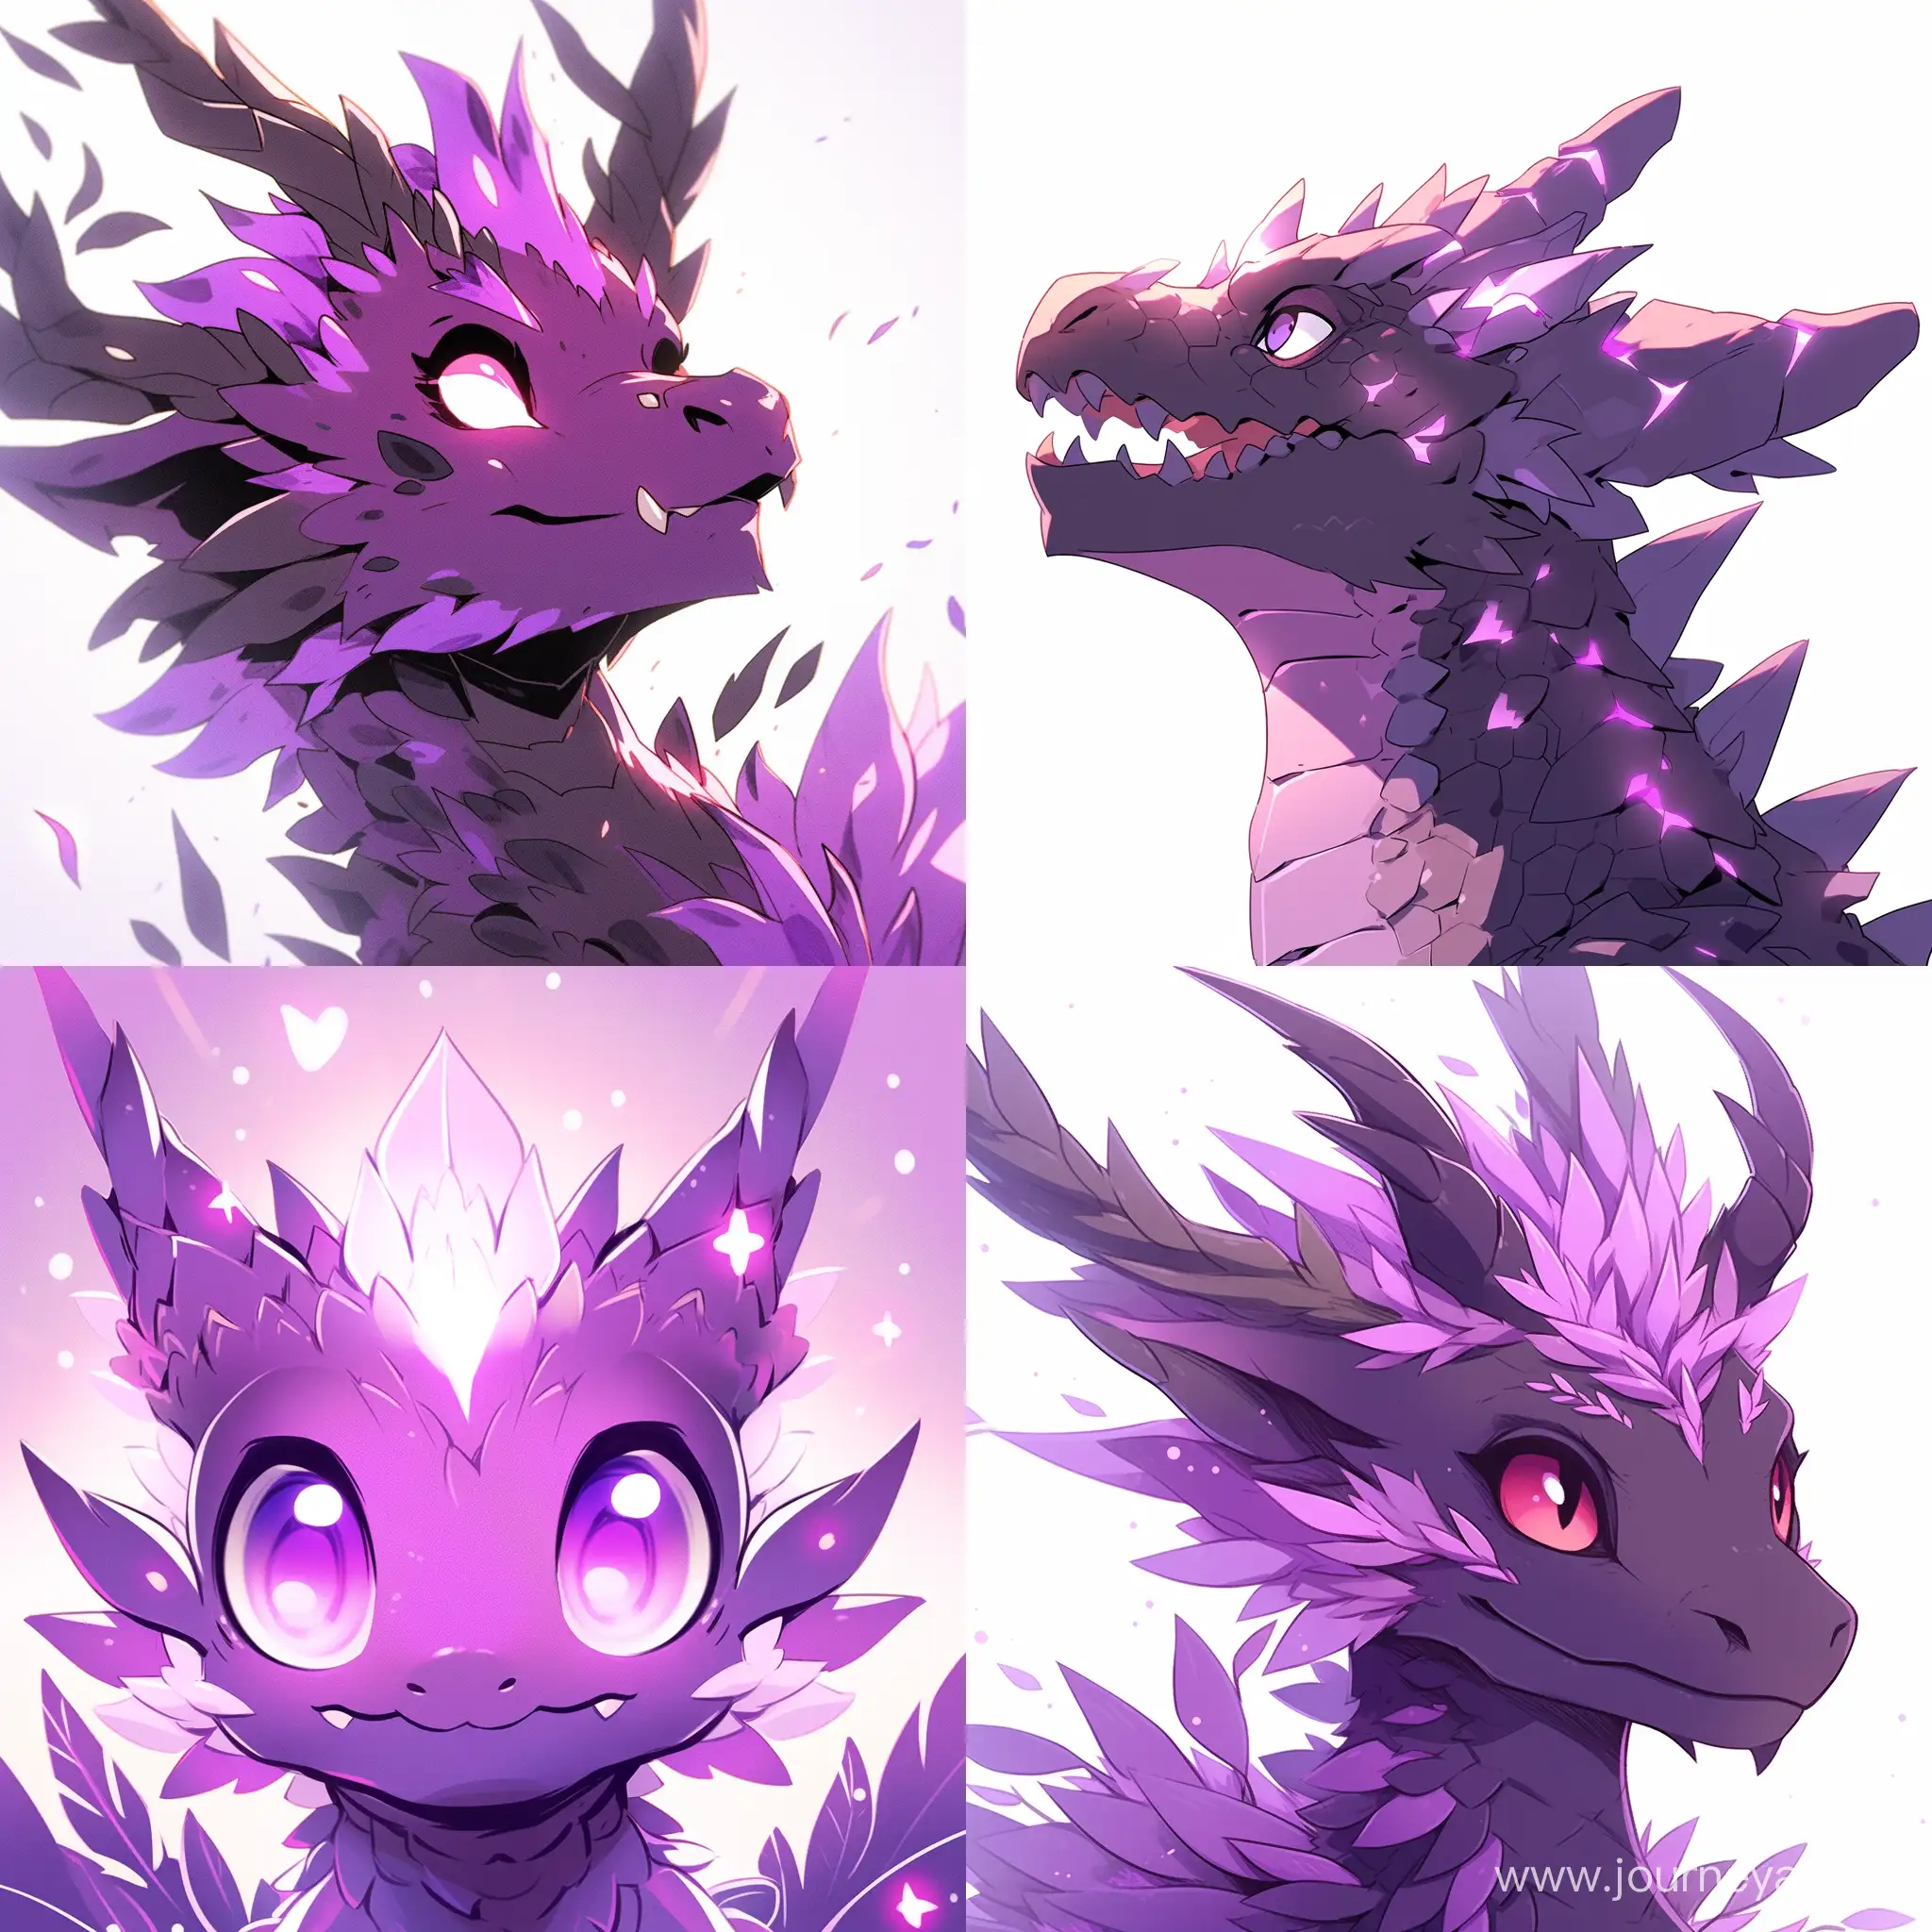 Cheerful-Purple-Dragon-with-Two-Horns-in-Ovopack-Draw-Style